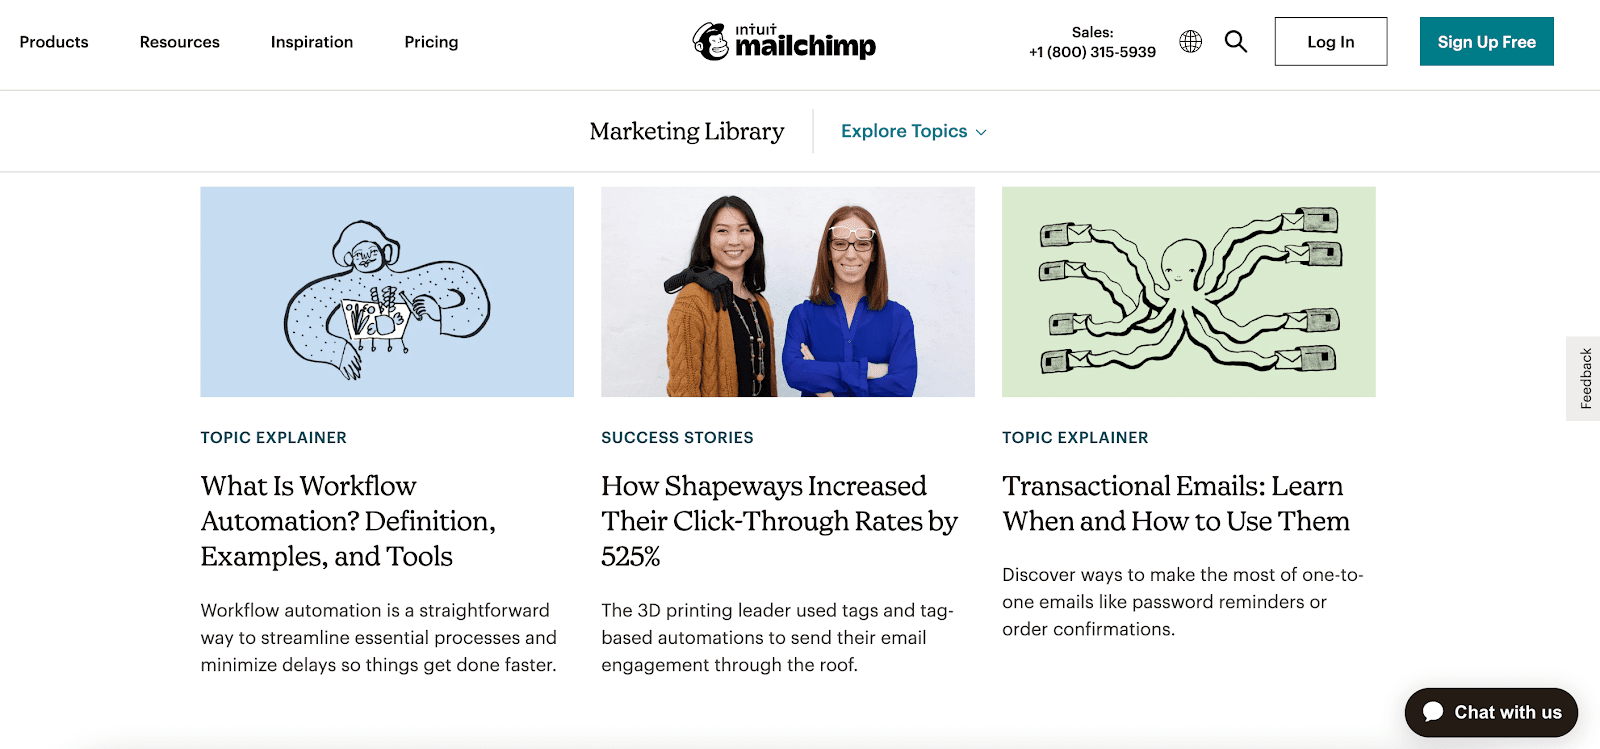 Mailchimp website and marketing library